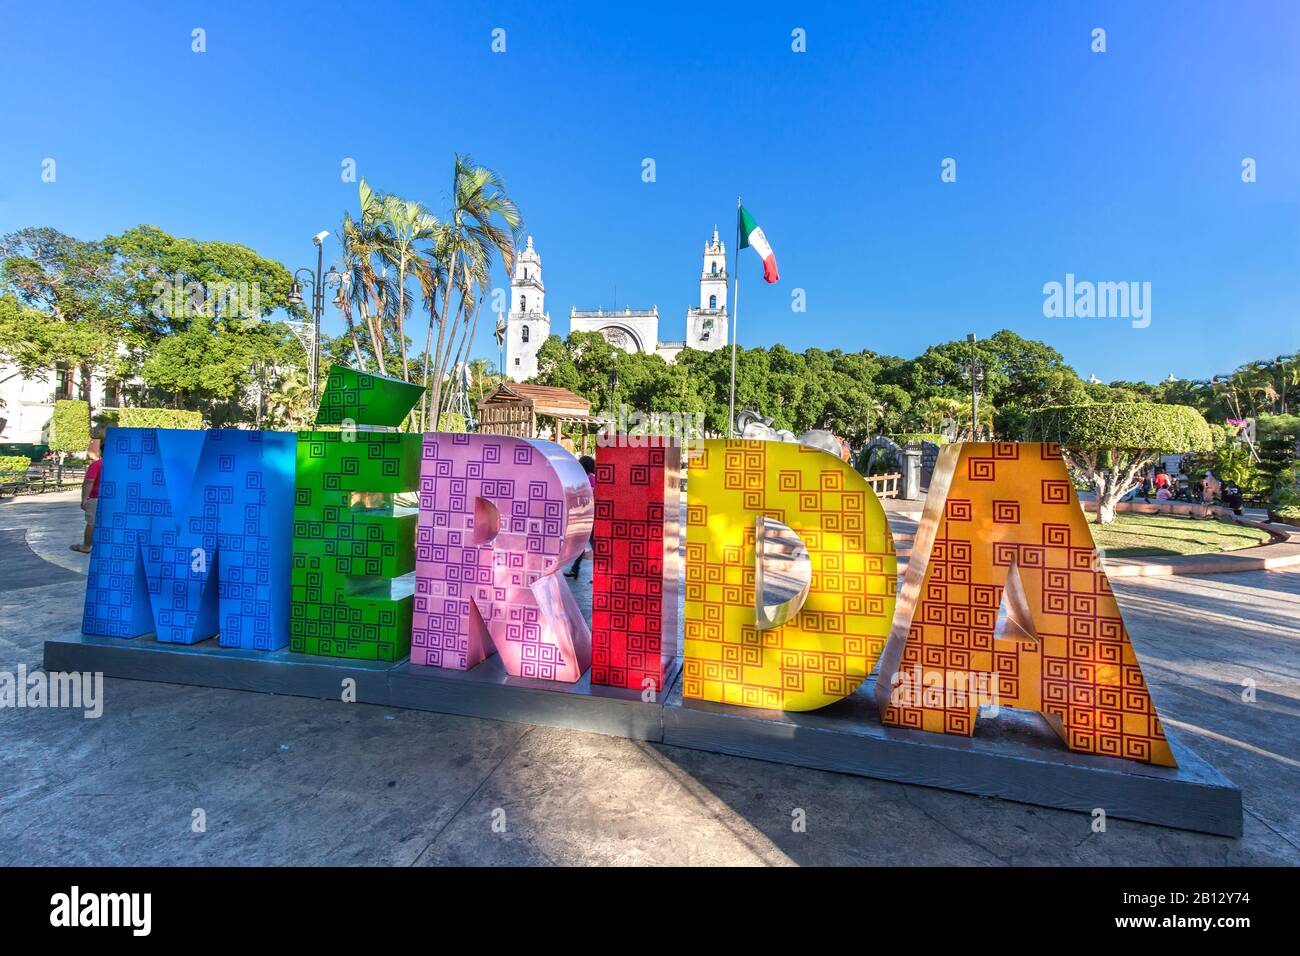 Big colorful letters representing Merida with an iconic Merida Cathedral at the background Stock Photo